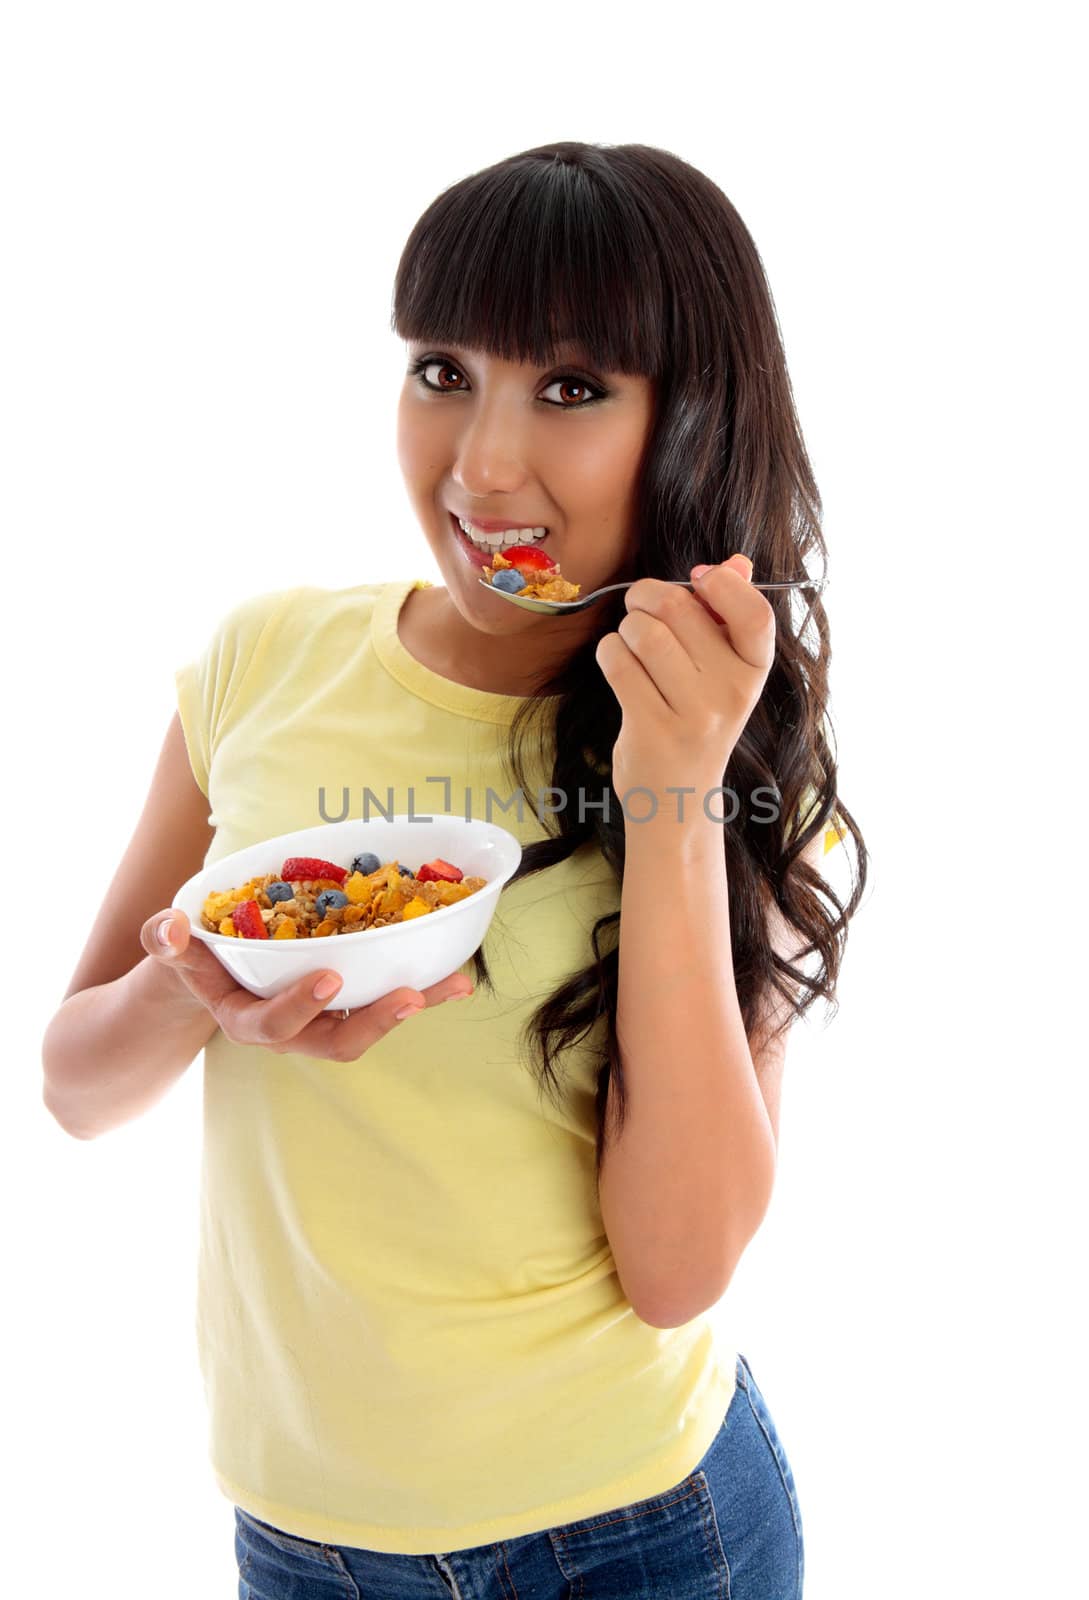 Smiling woman eating cereal breakfast by lovleah